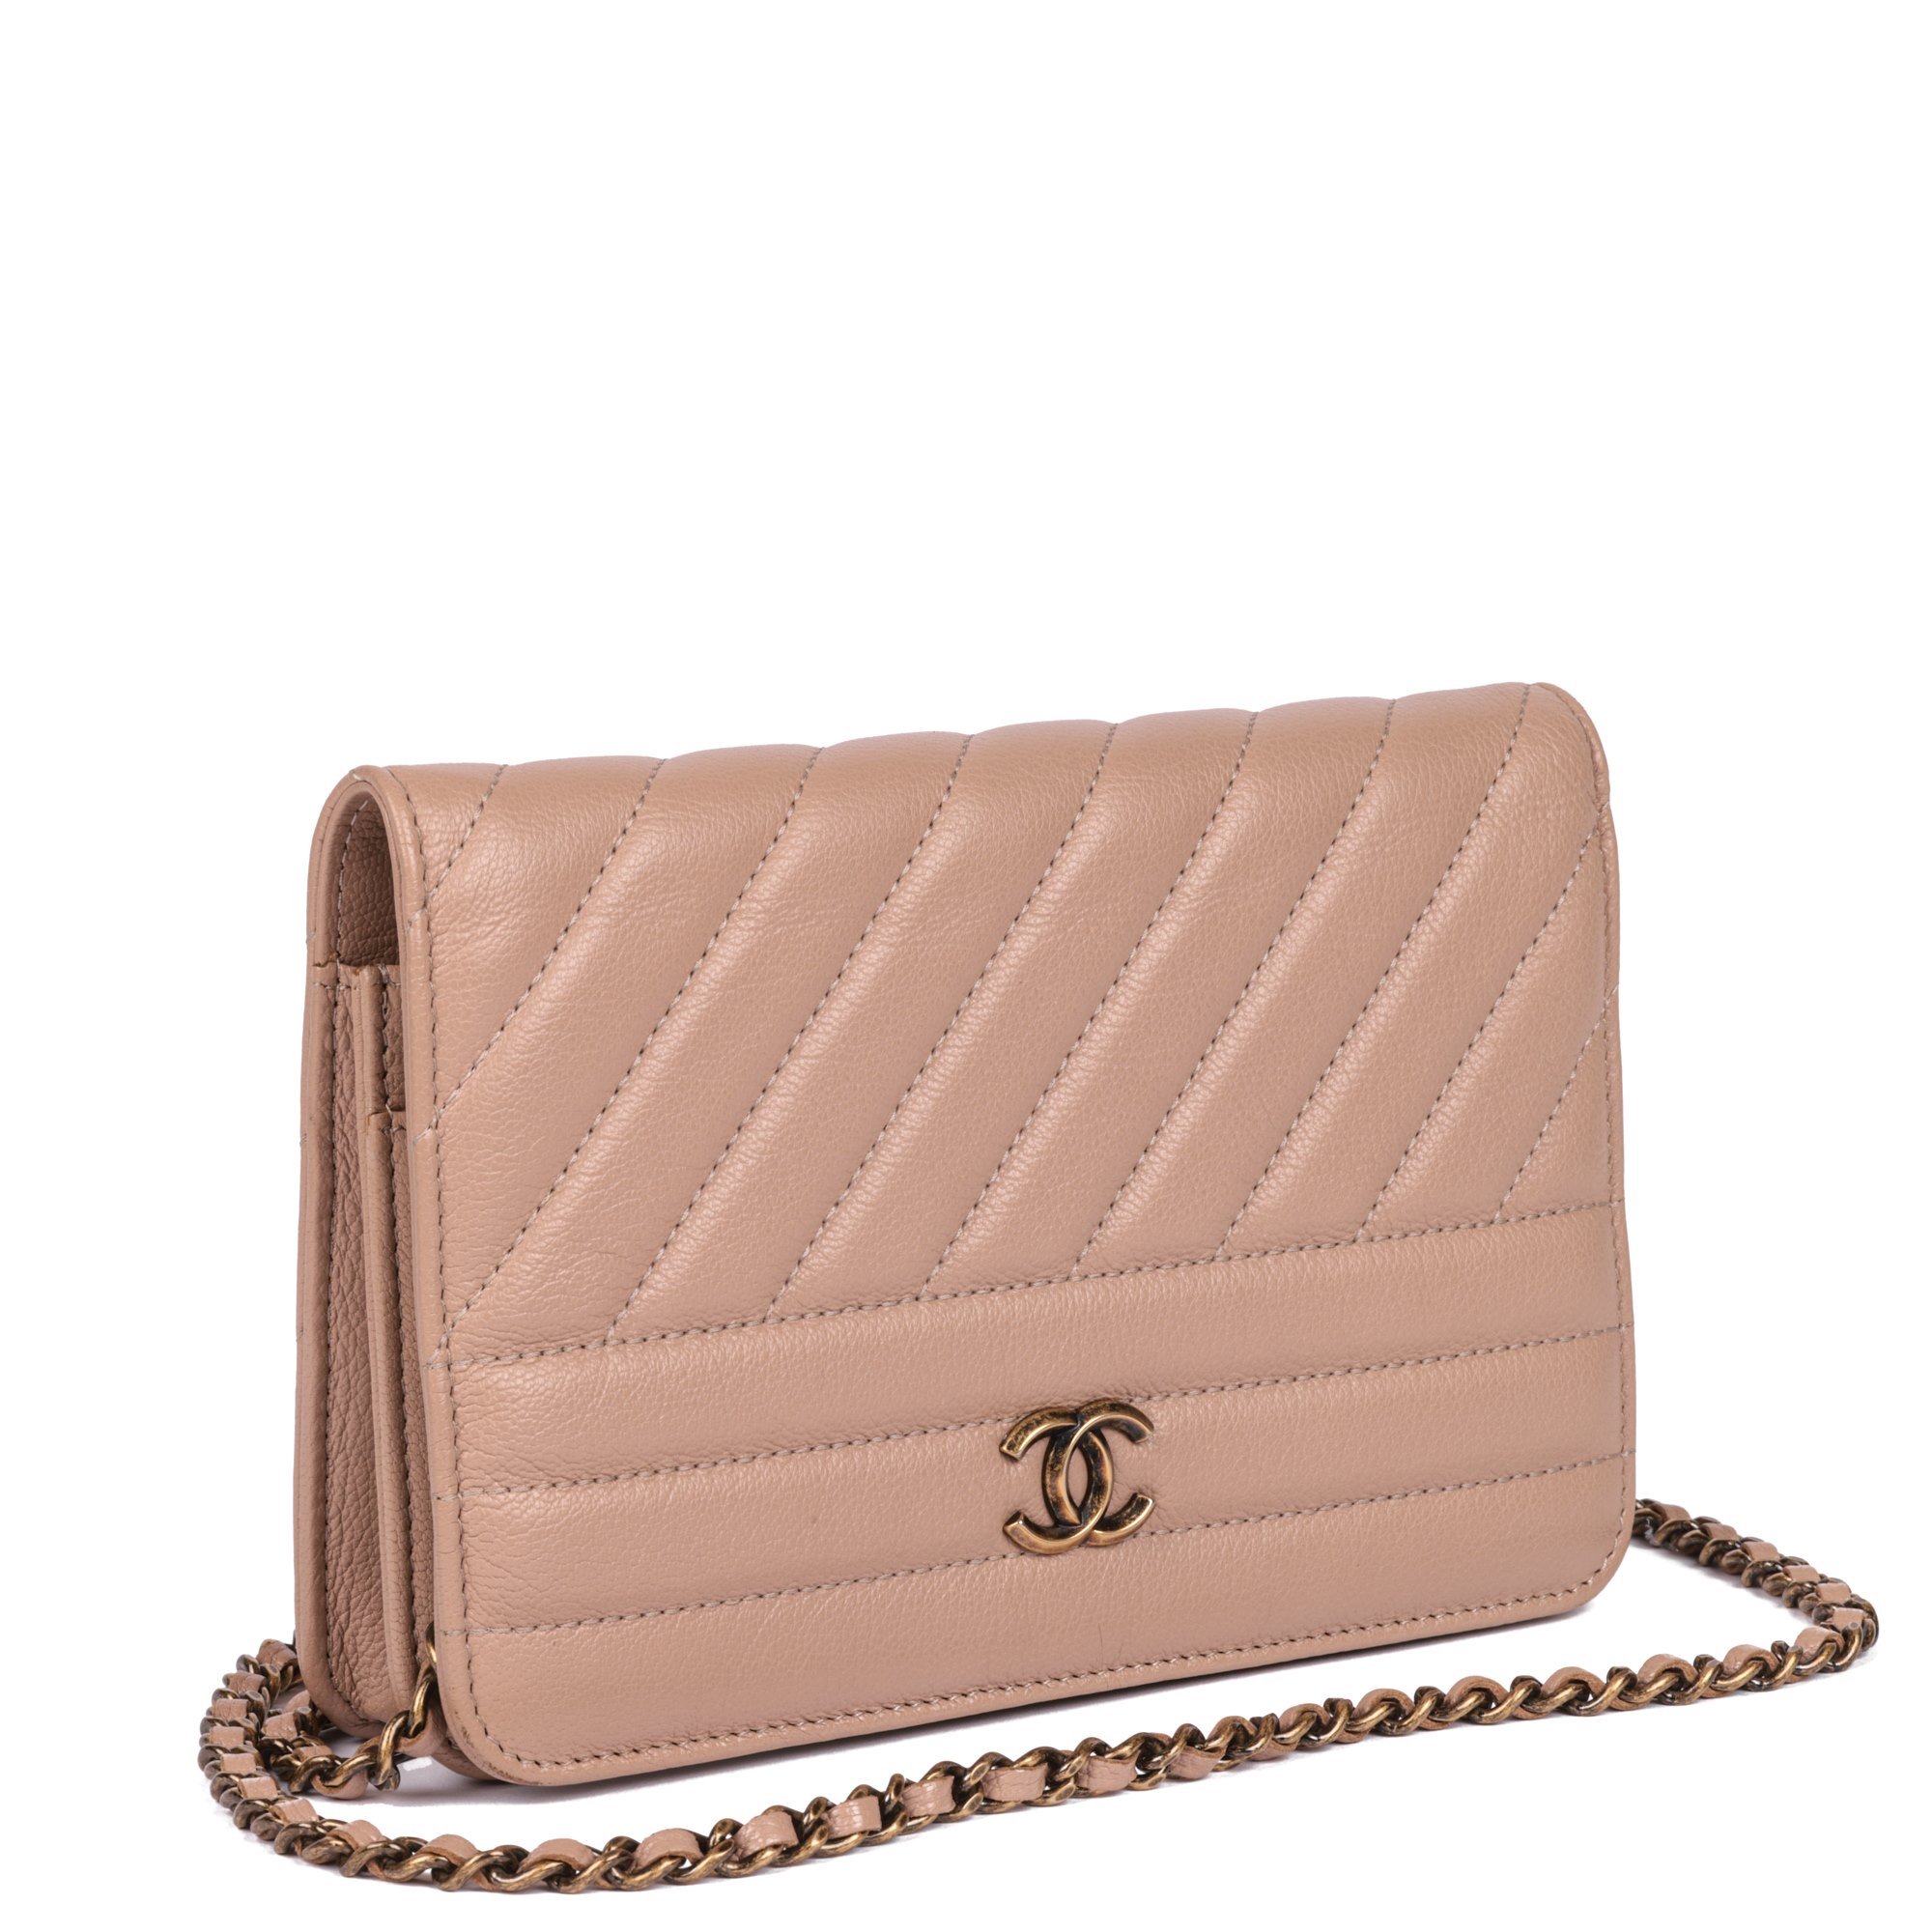 Chanel Beige Diagonal Quilted Goatskin Leather Wallet-on-Chain WOC